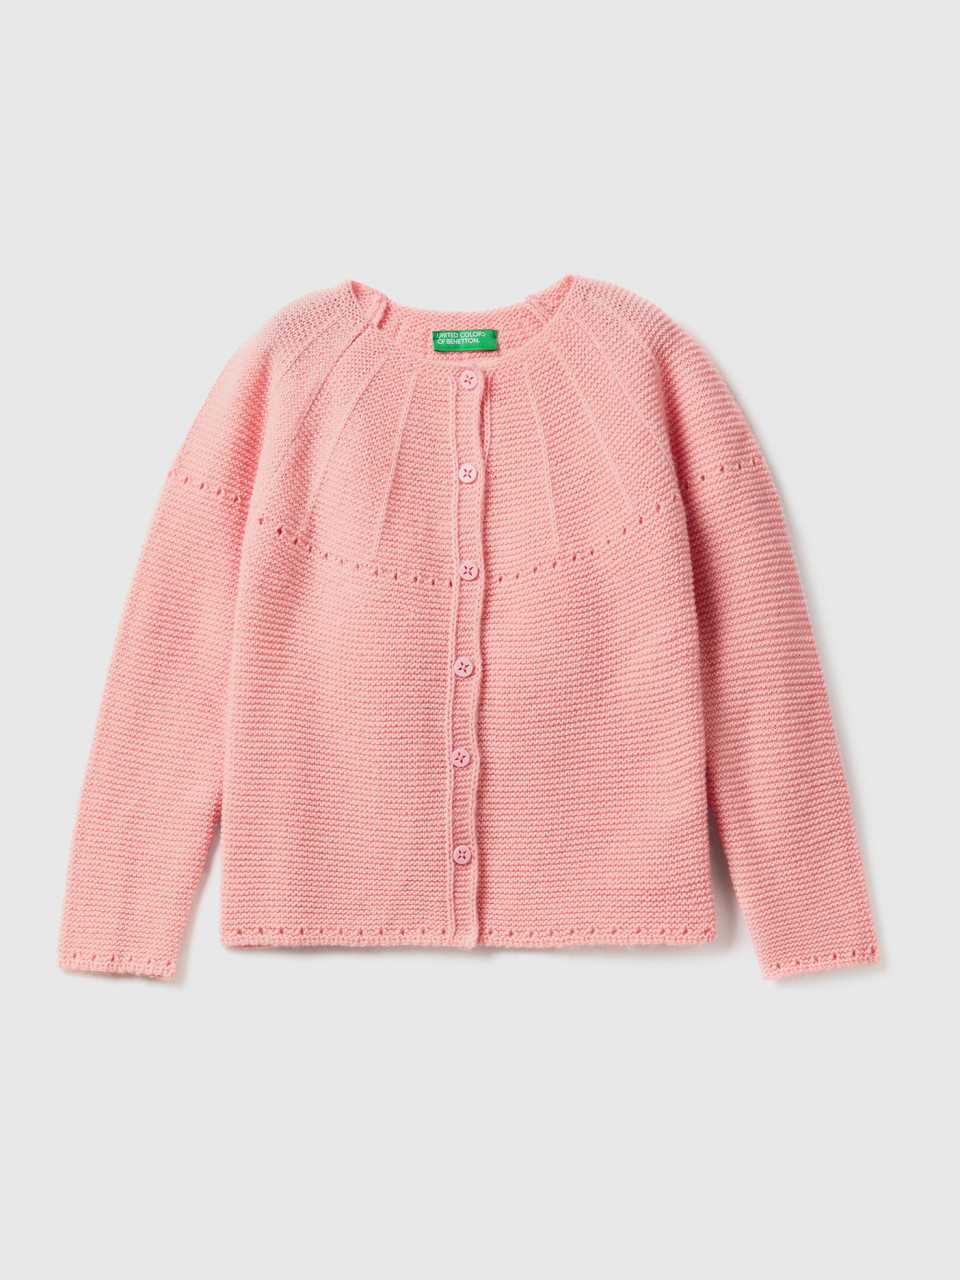 Benetton, Cardigan With Perforated Details, Pink, Kids